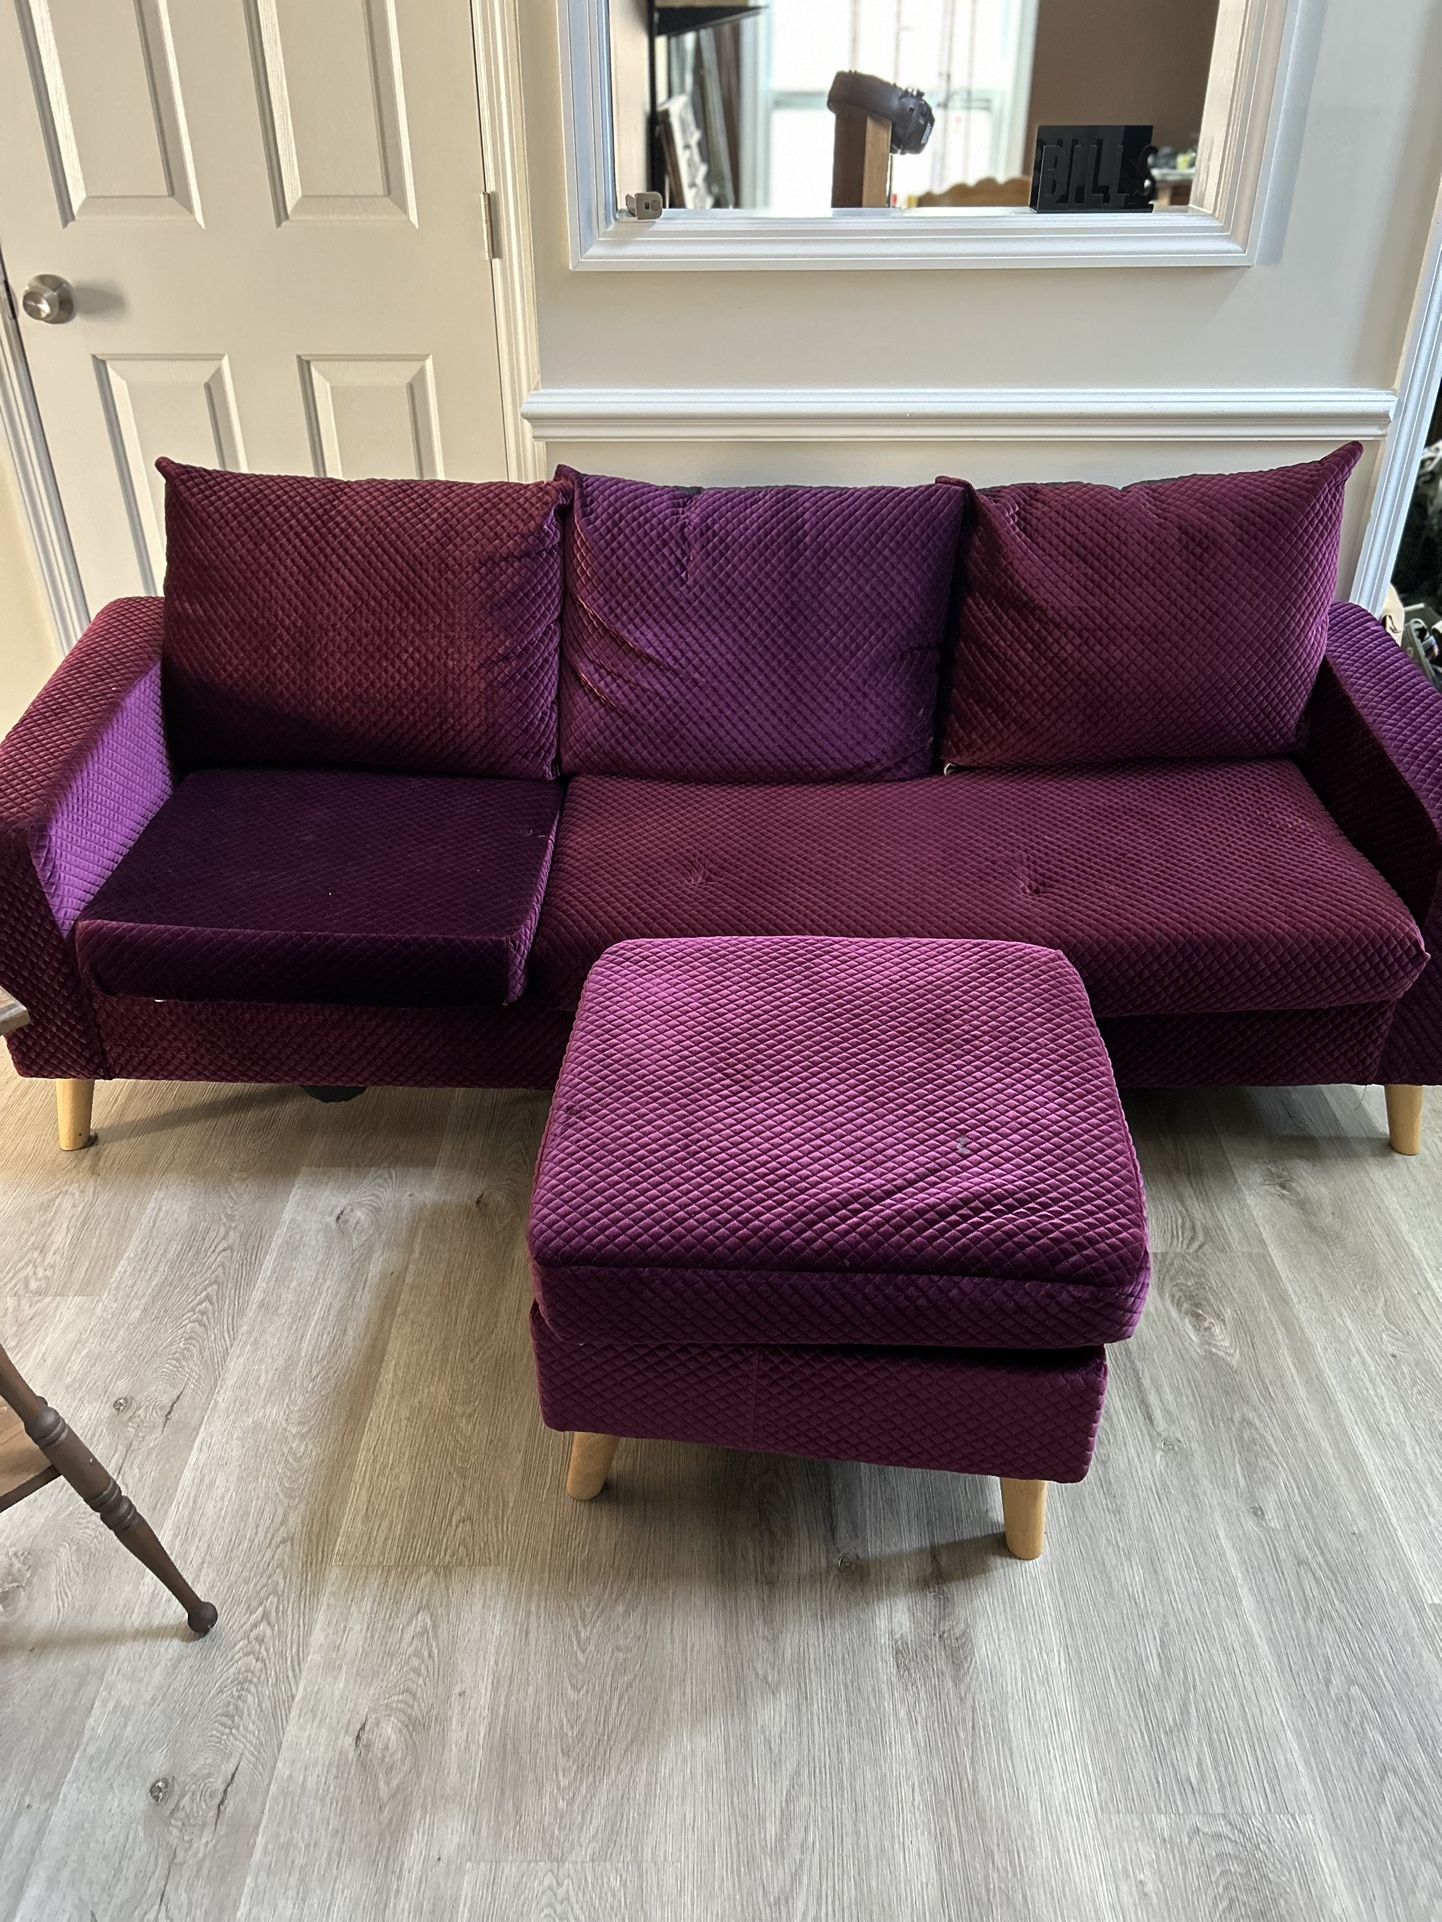 Small Purple Couch